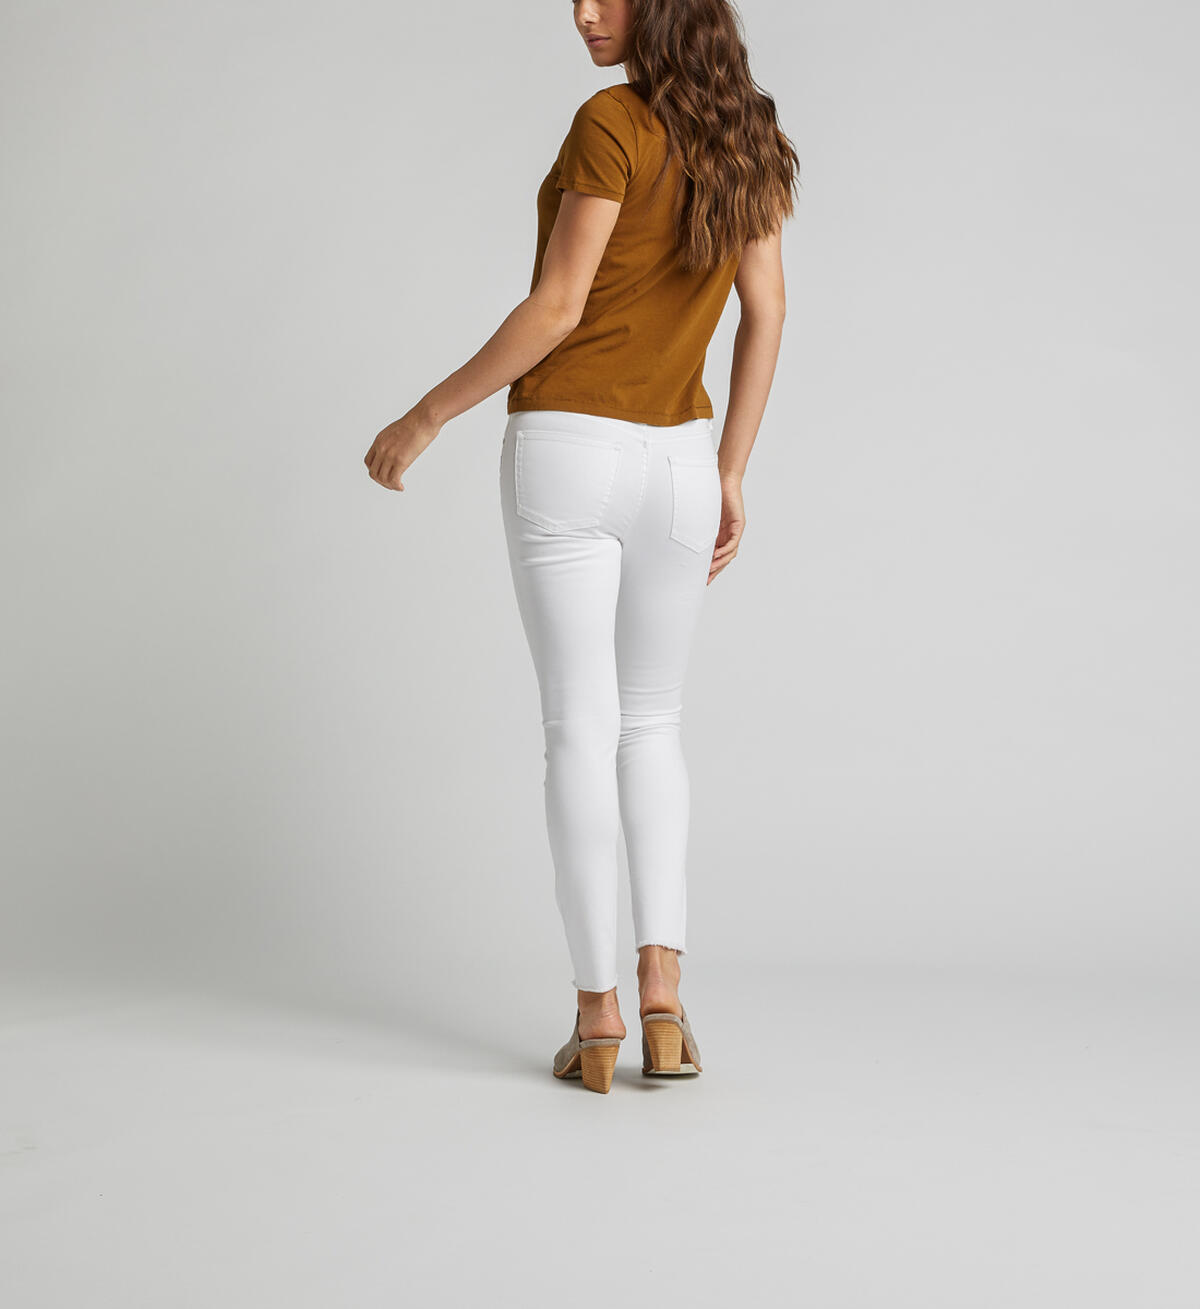 Most Wanted Mid Rise Skinny Leg Jeans, , hi-res image number 1